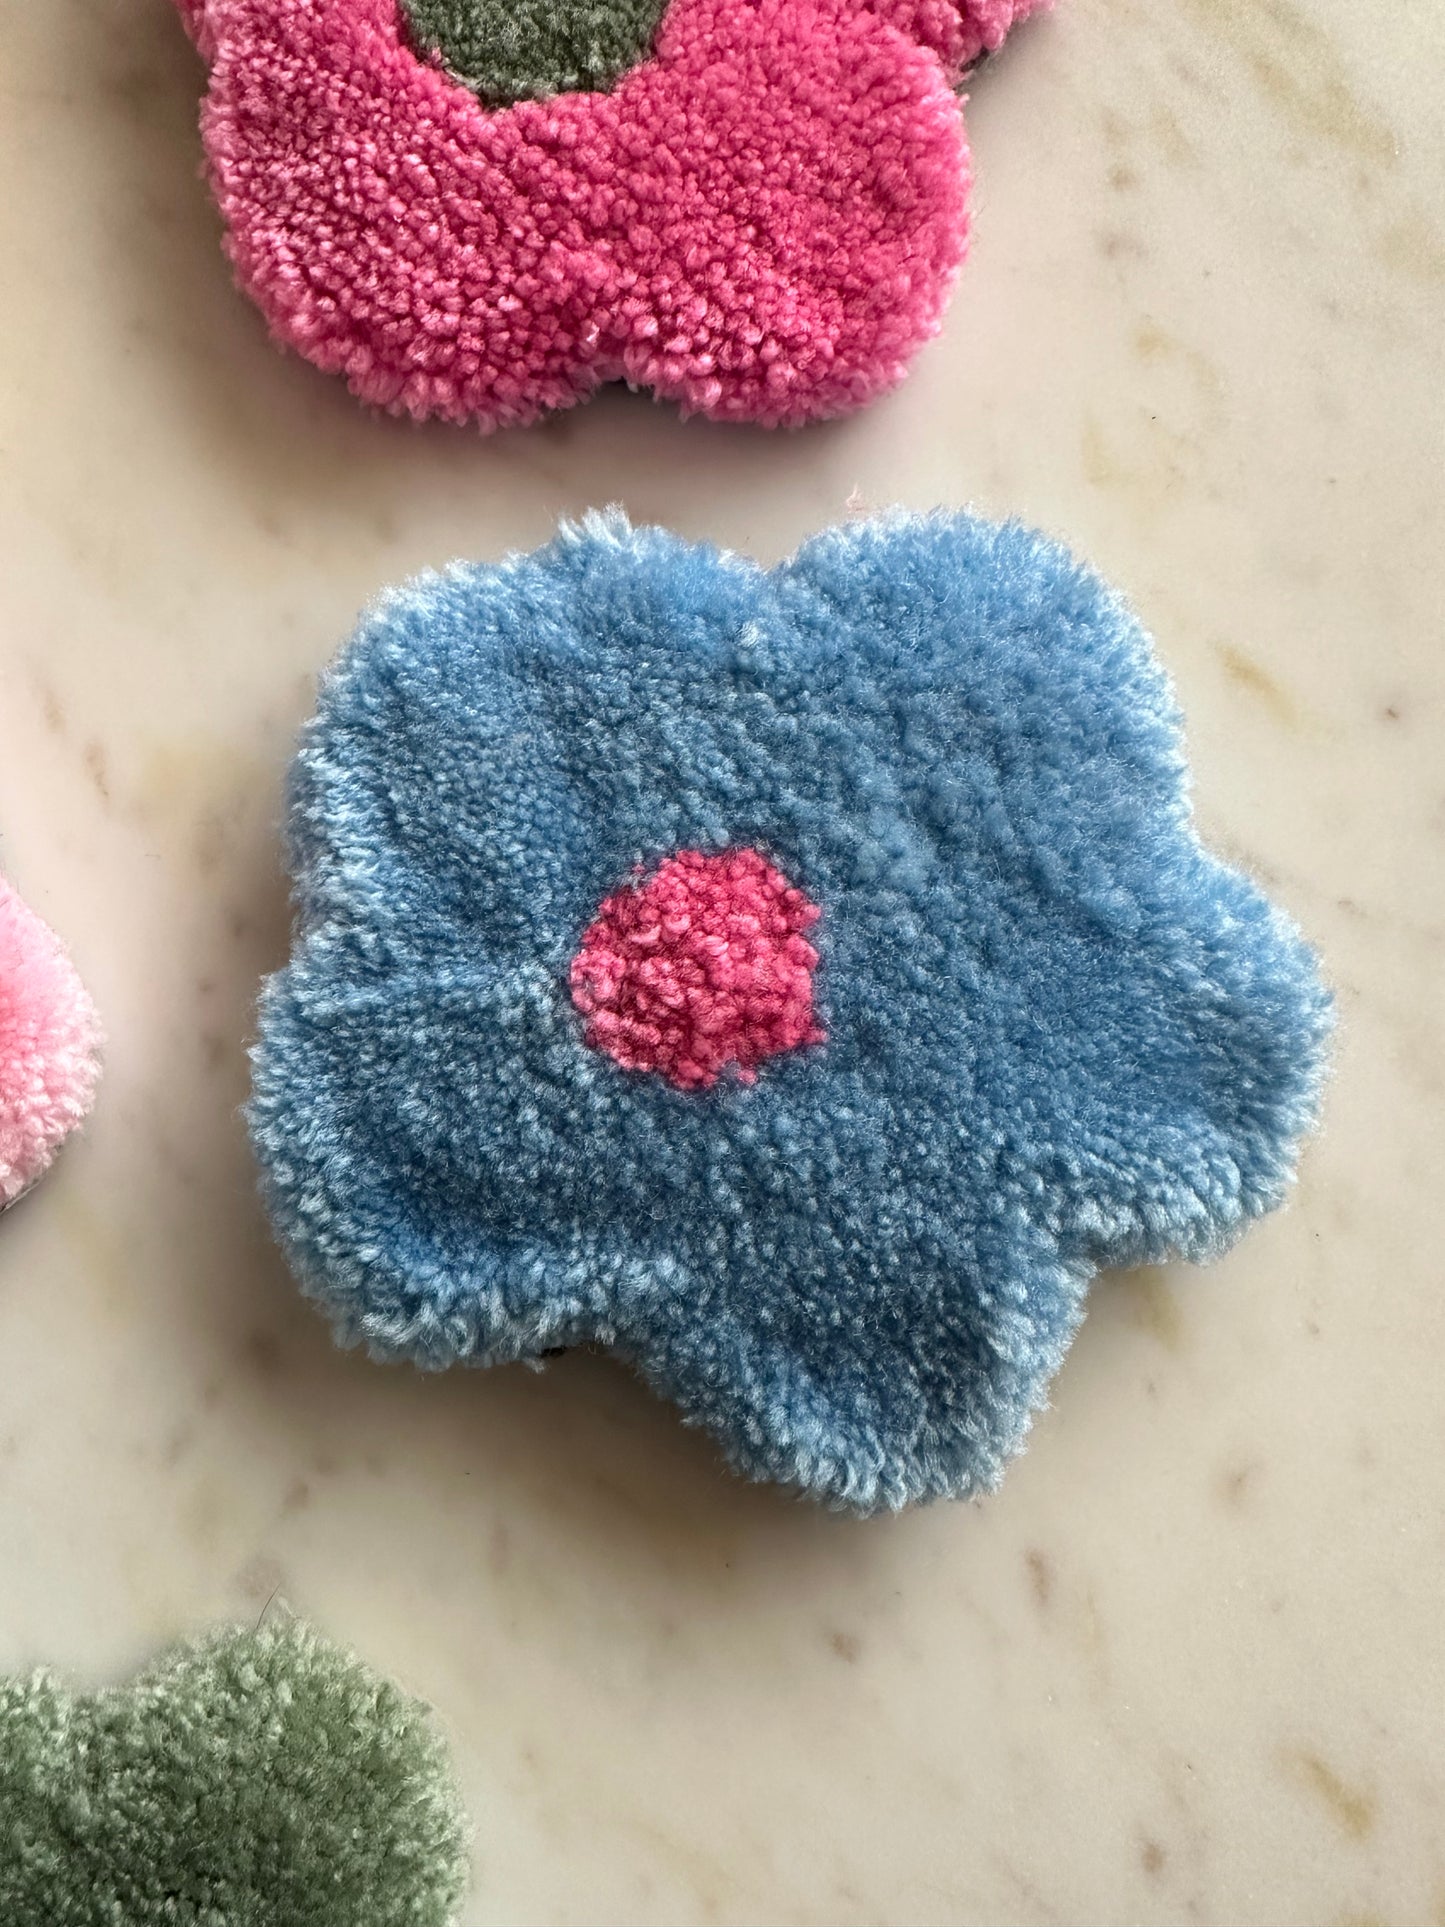 Shows one of our tufted flower coasters with blue petals and a pink core. Made by The Woollers